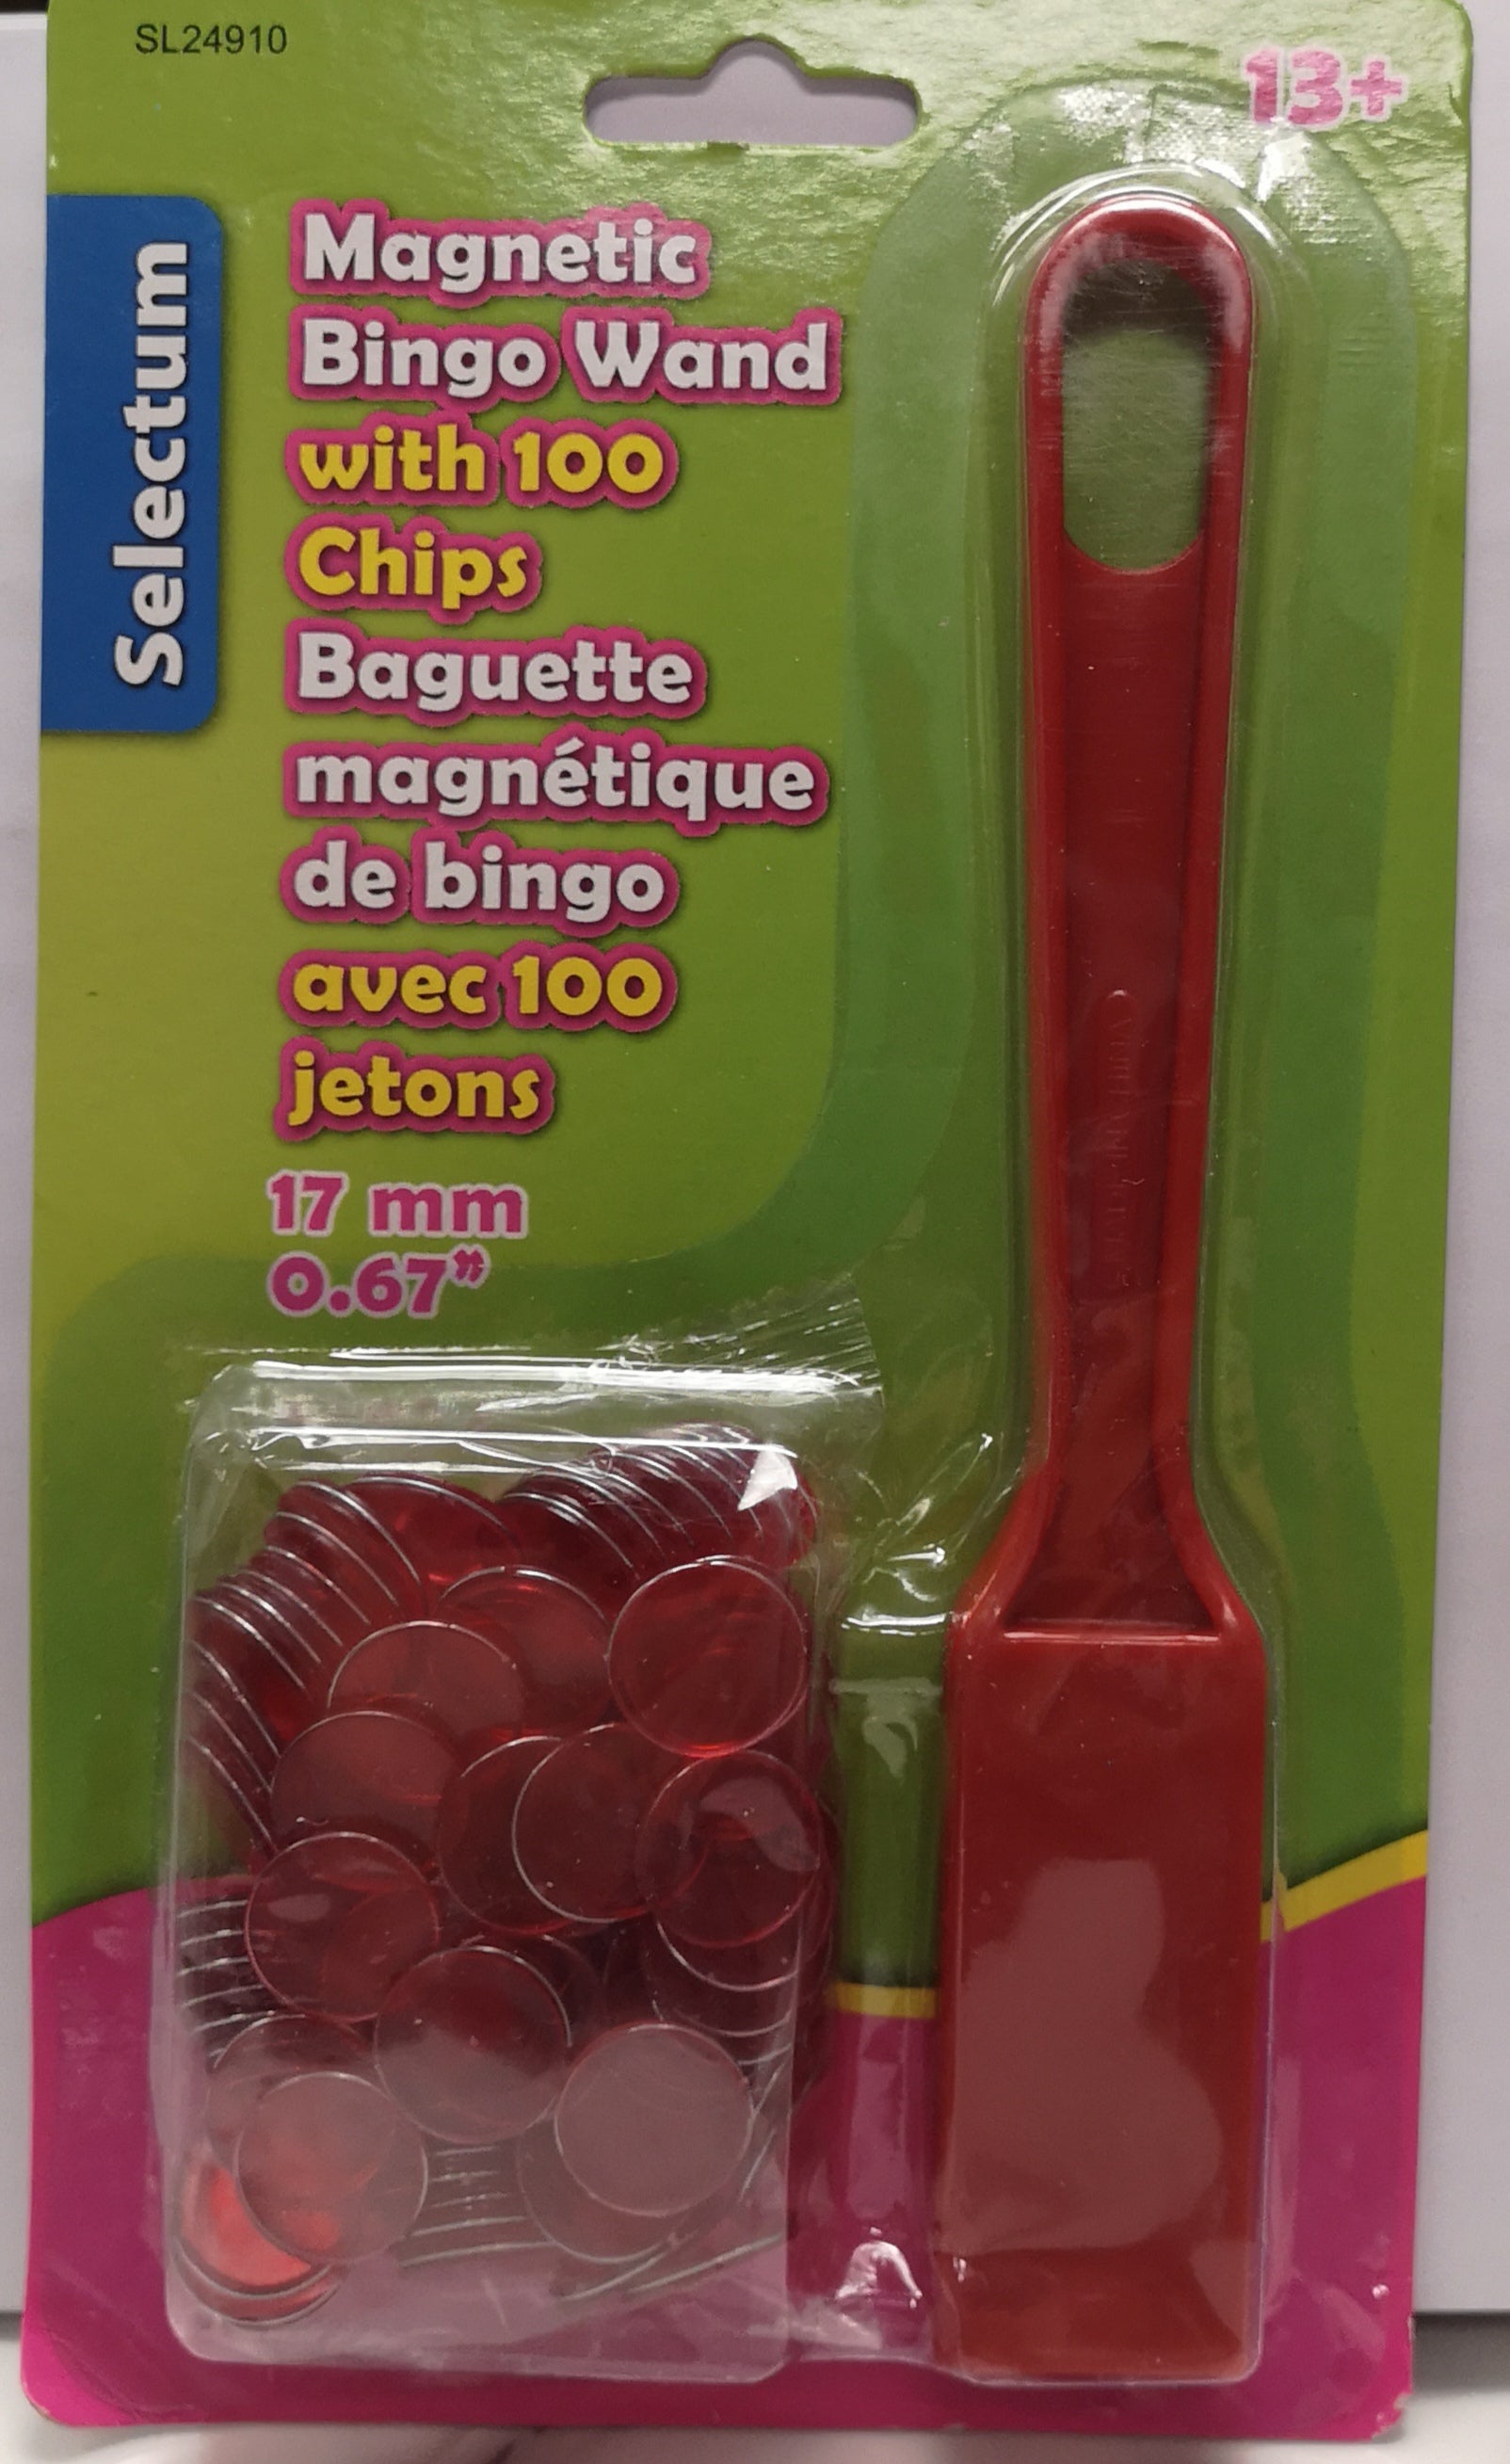 Magnetic Bingo Wand with 100 Chips